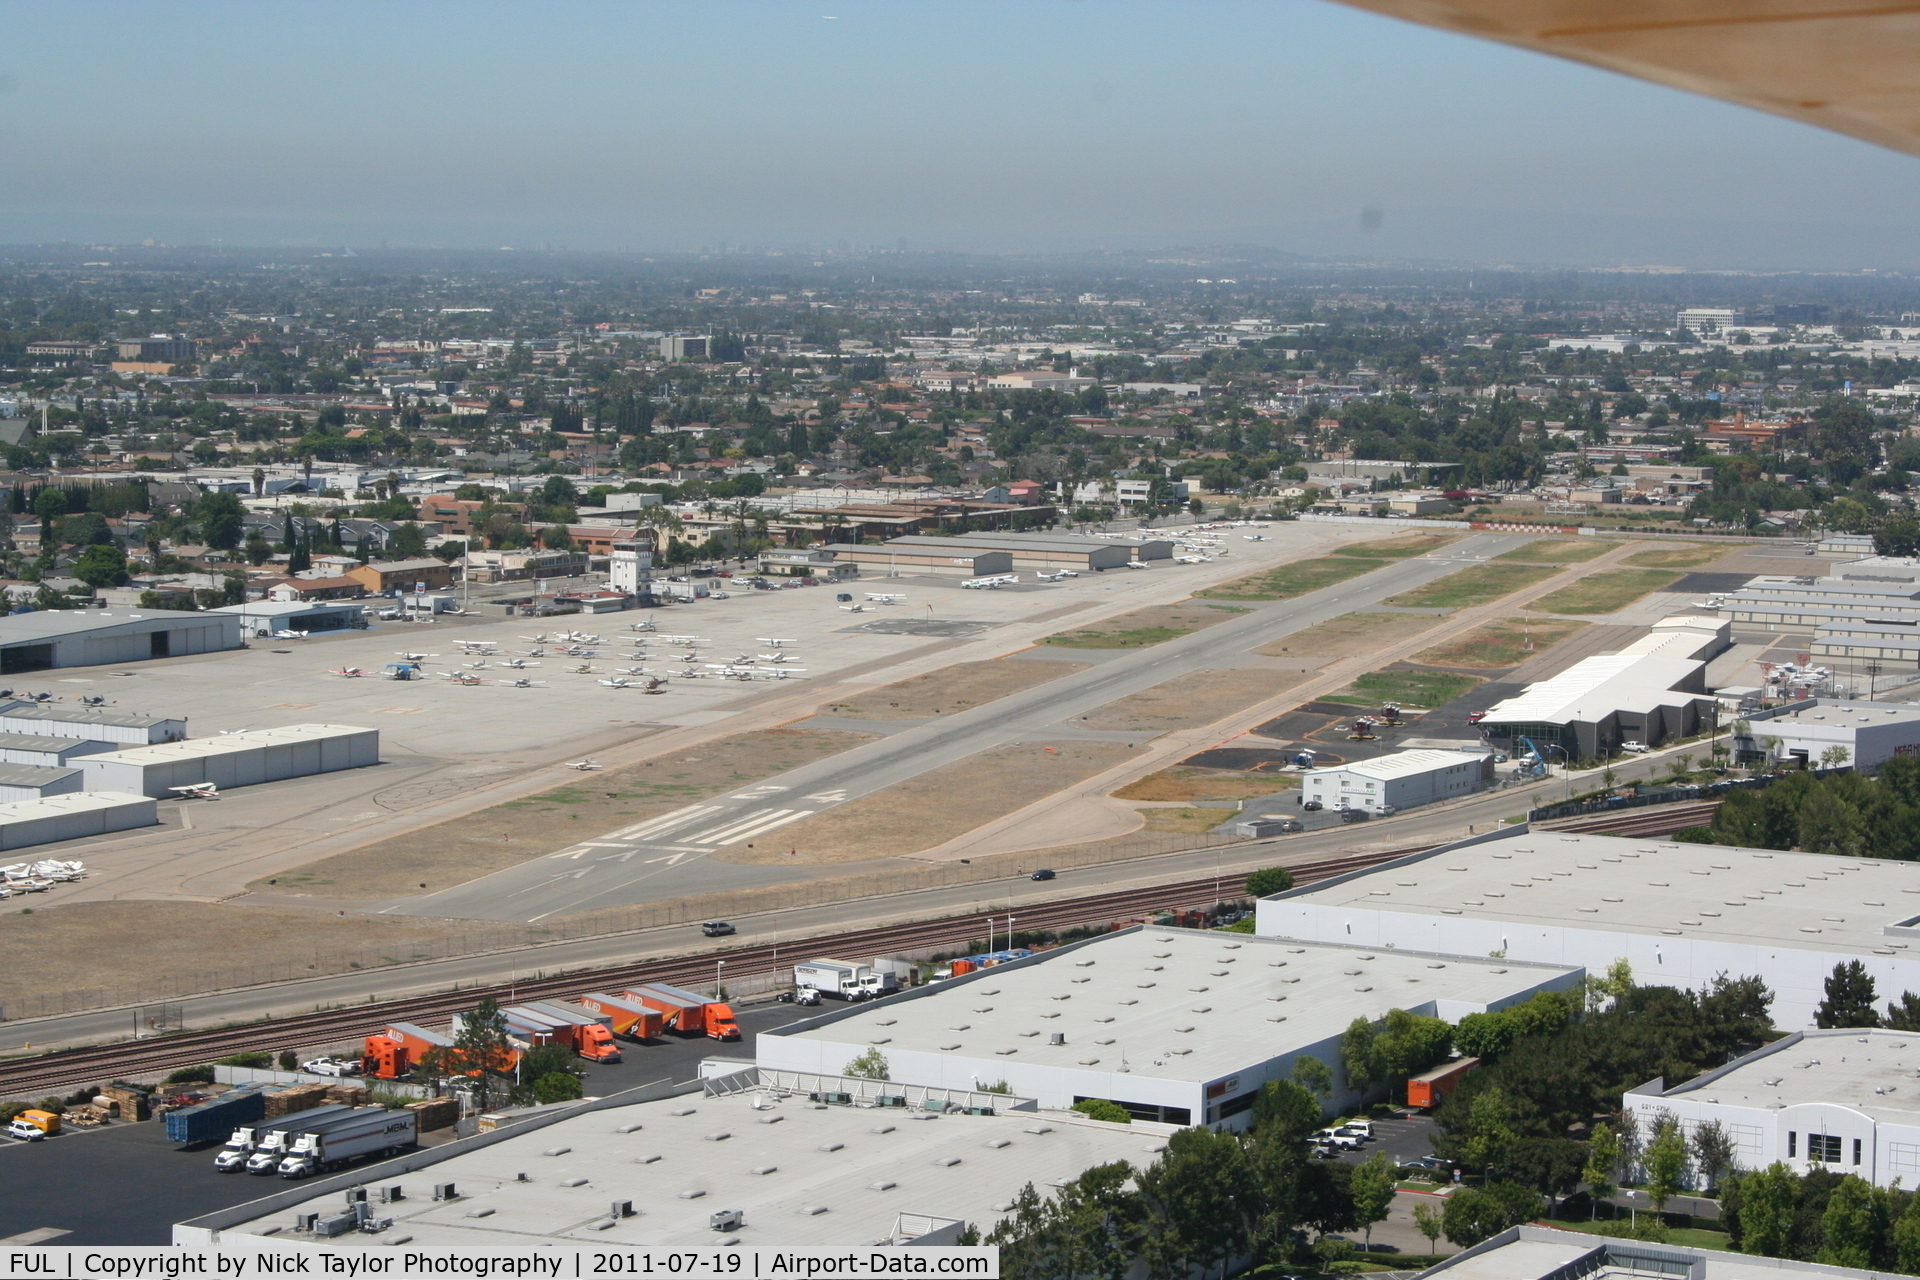 Fullerton Municipal Airport (FUL) - Turning final for RWY 24